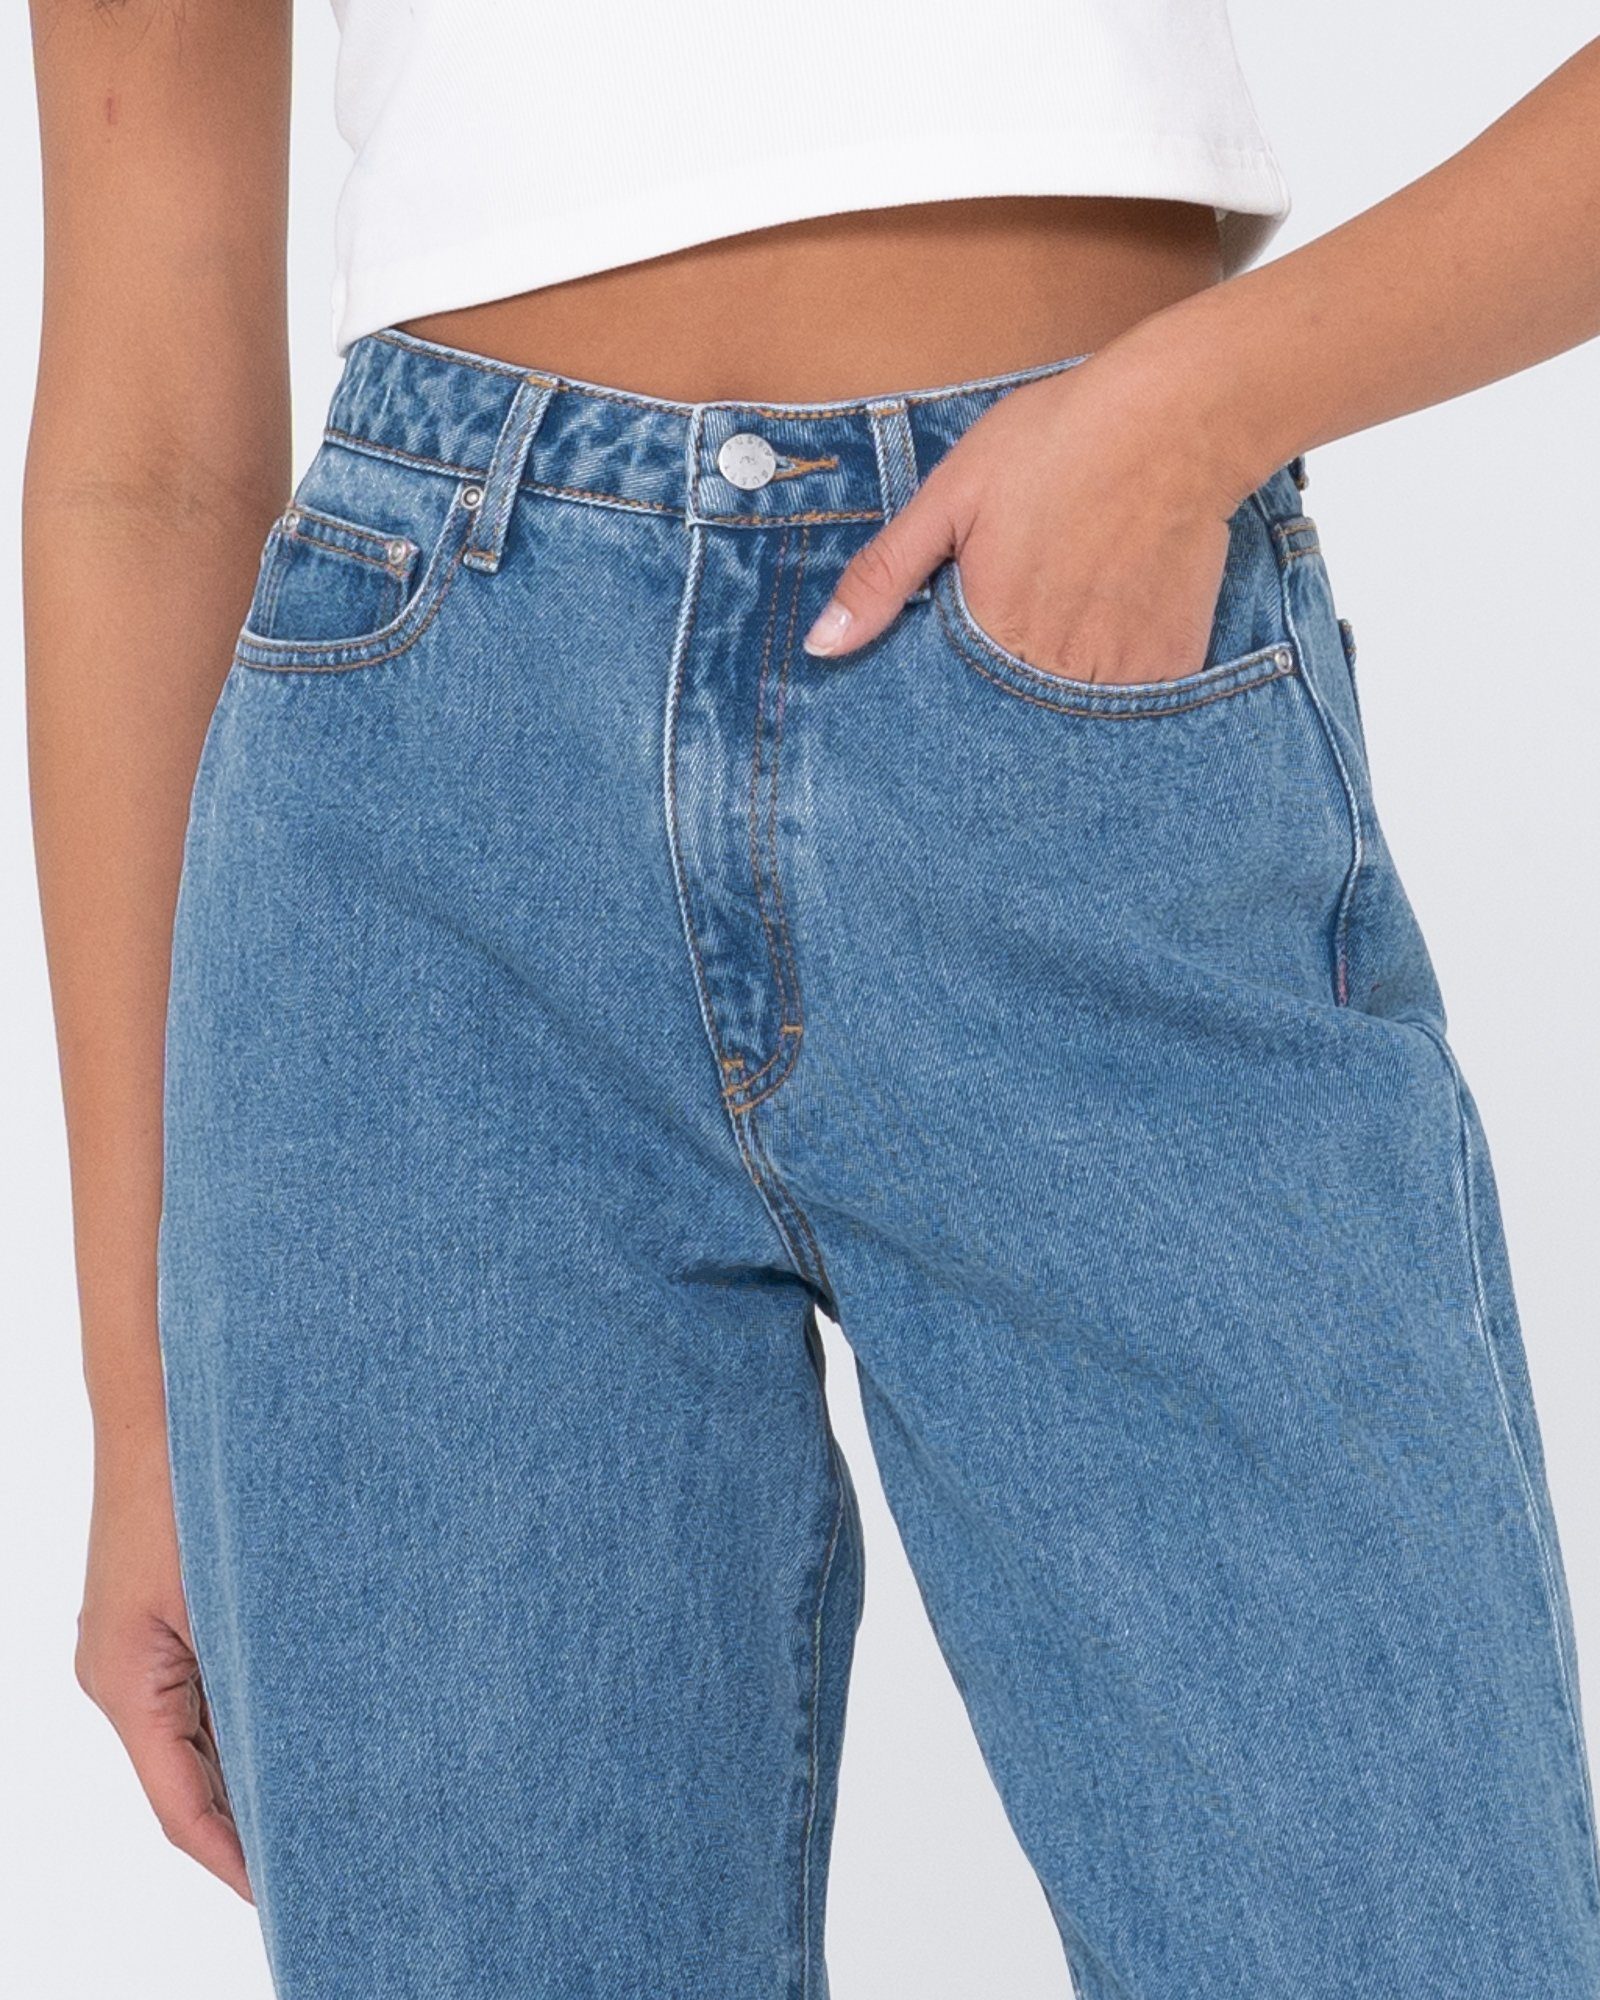 BAGGY Weite Sea HIGH - Rusty Blue JEAN Jeans